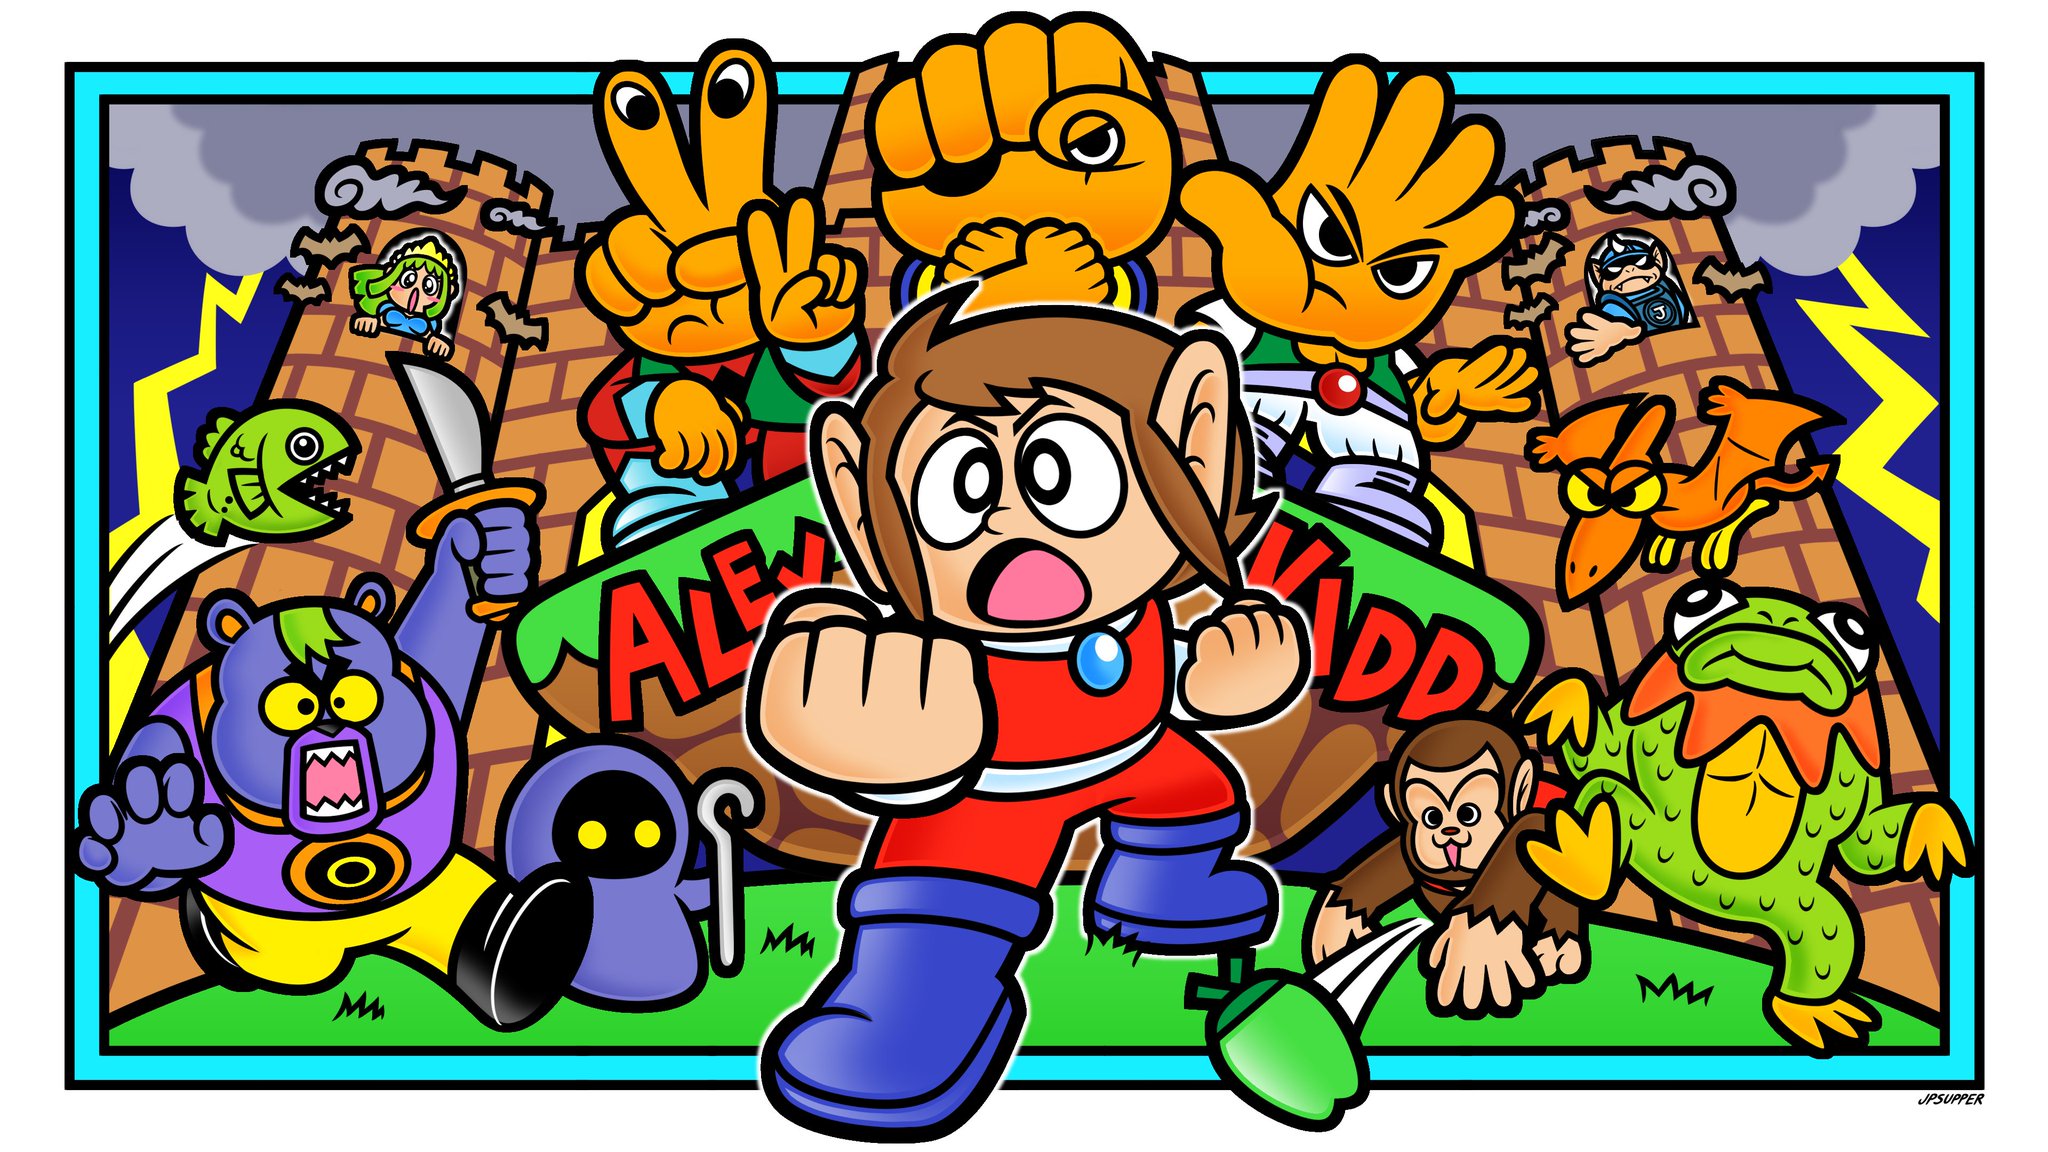 SEGA Forever marks 35 years since Alex Kidd in Miracle World was first unleashed on the SEGA Master System! What are your favorite memories of the Alex Kidd series?